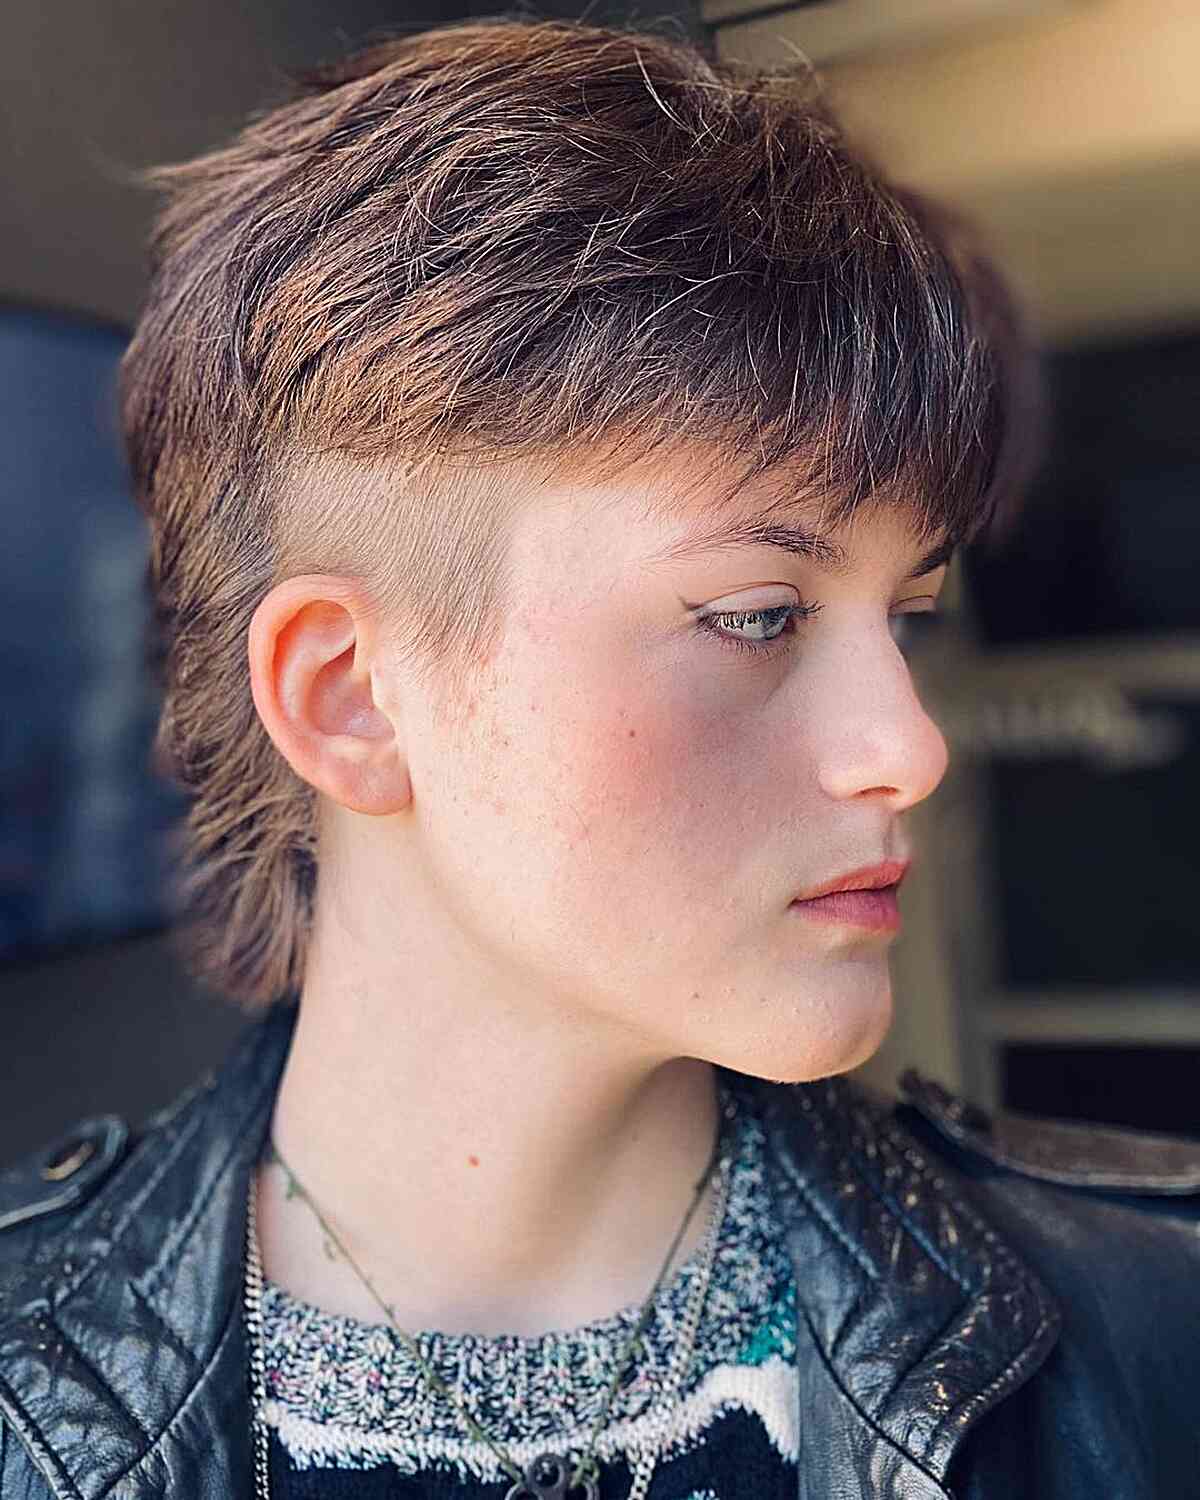 Undercut 90s-Inspired Mullet with Bangs for Women with an edgy style